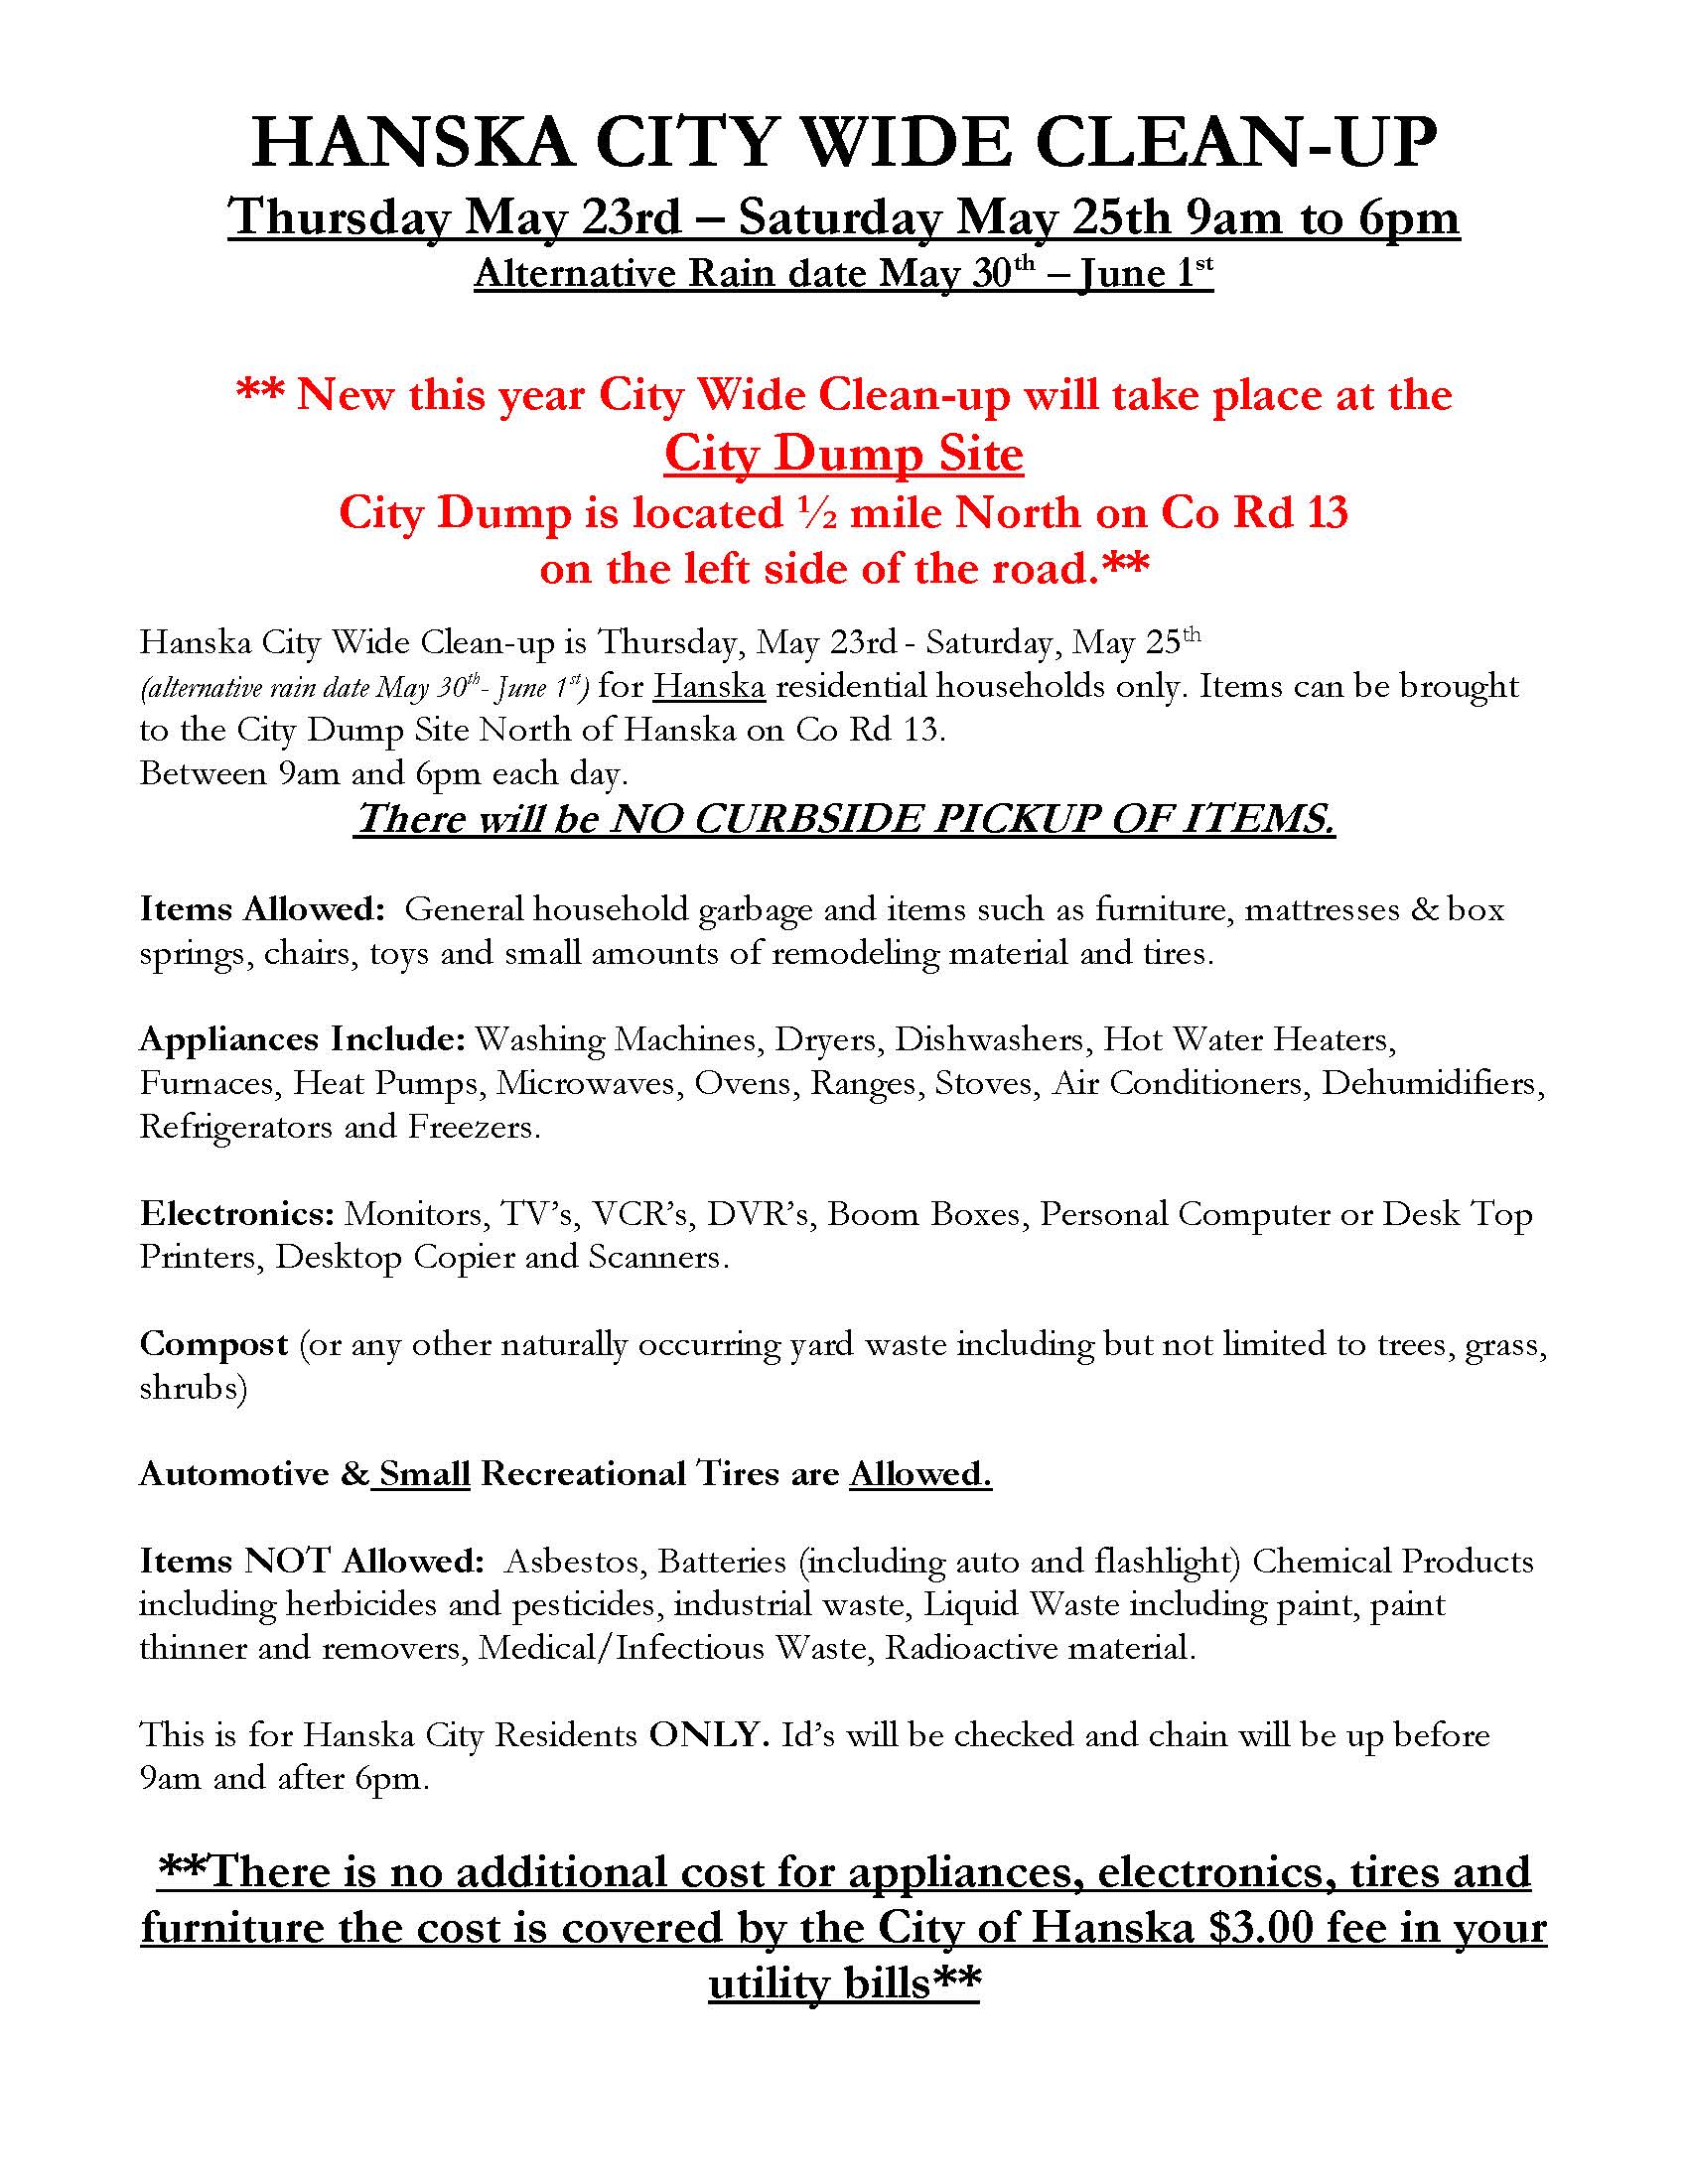 Flyer for City Wide Clean-Up